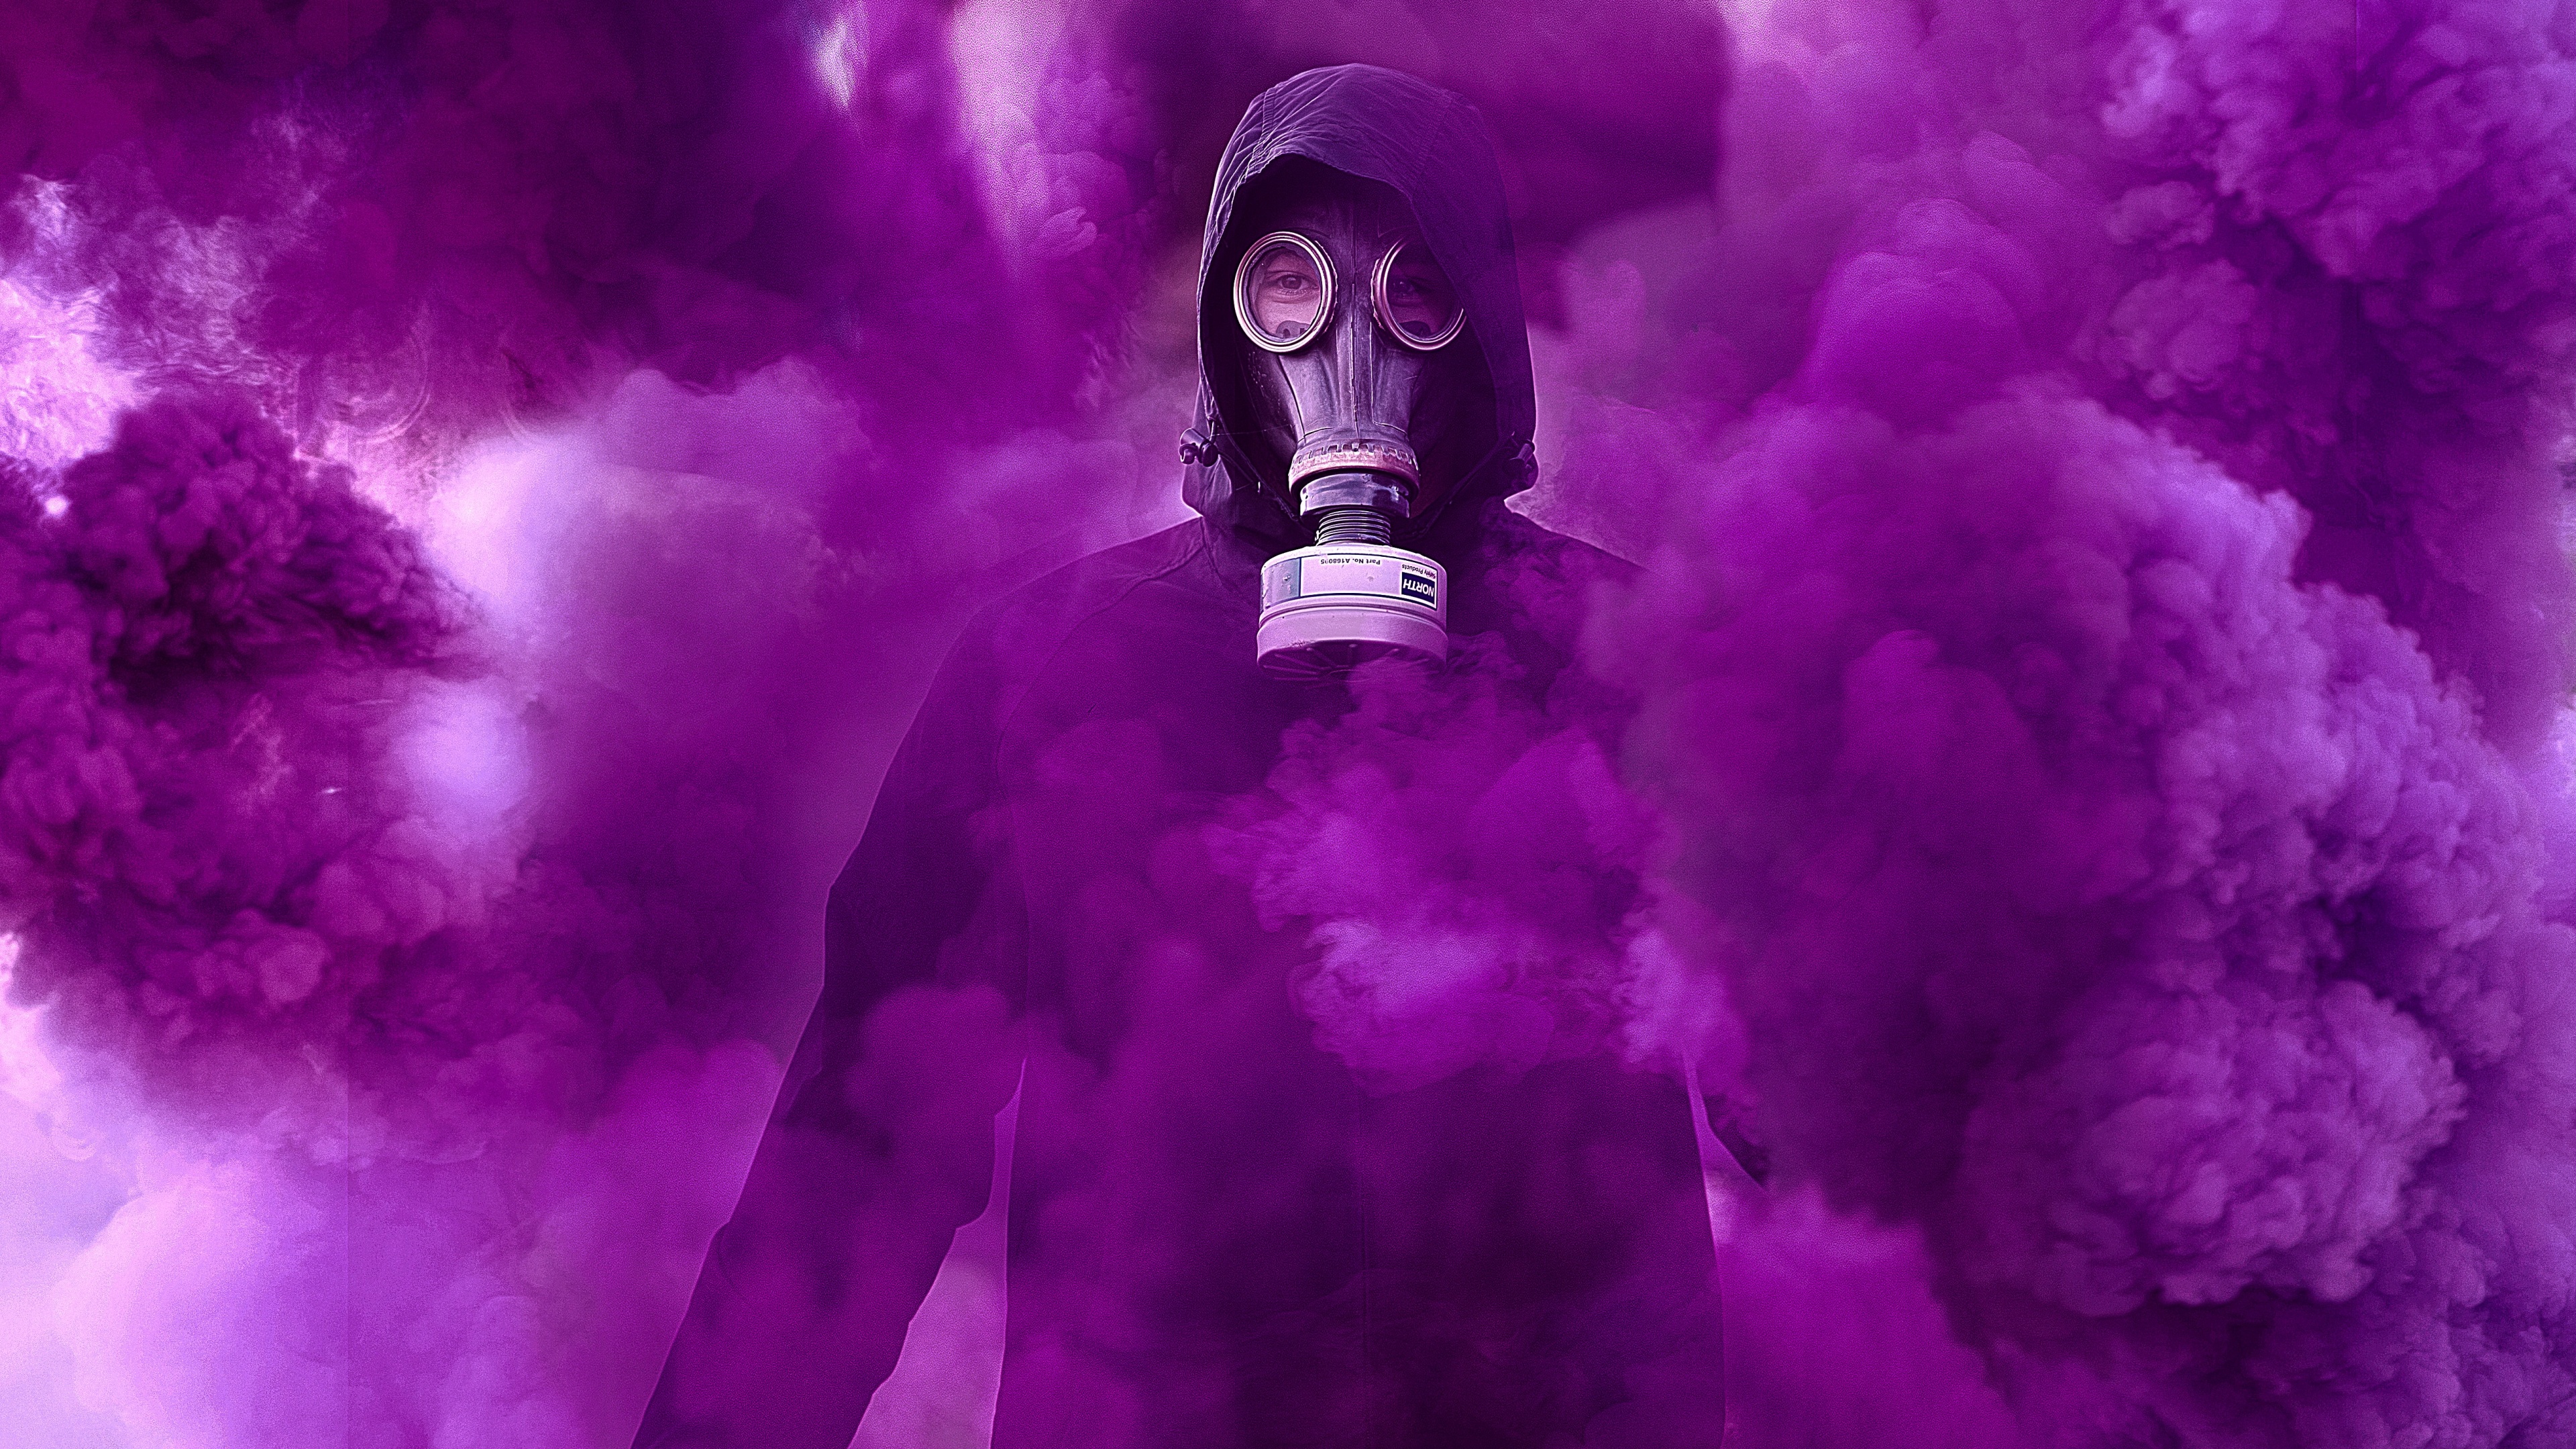 Gas mask Wallpaper 4K Hoodie Person in Black Photography 3324